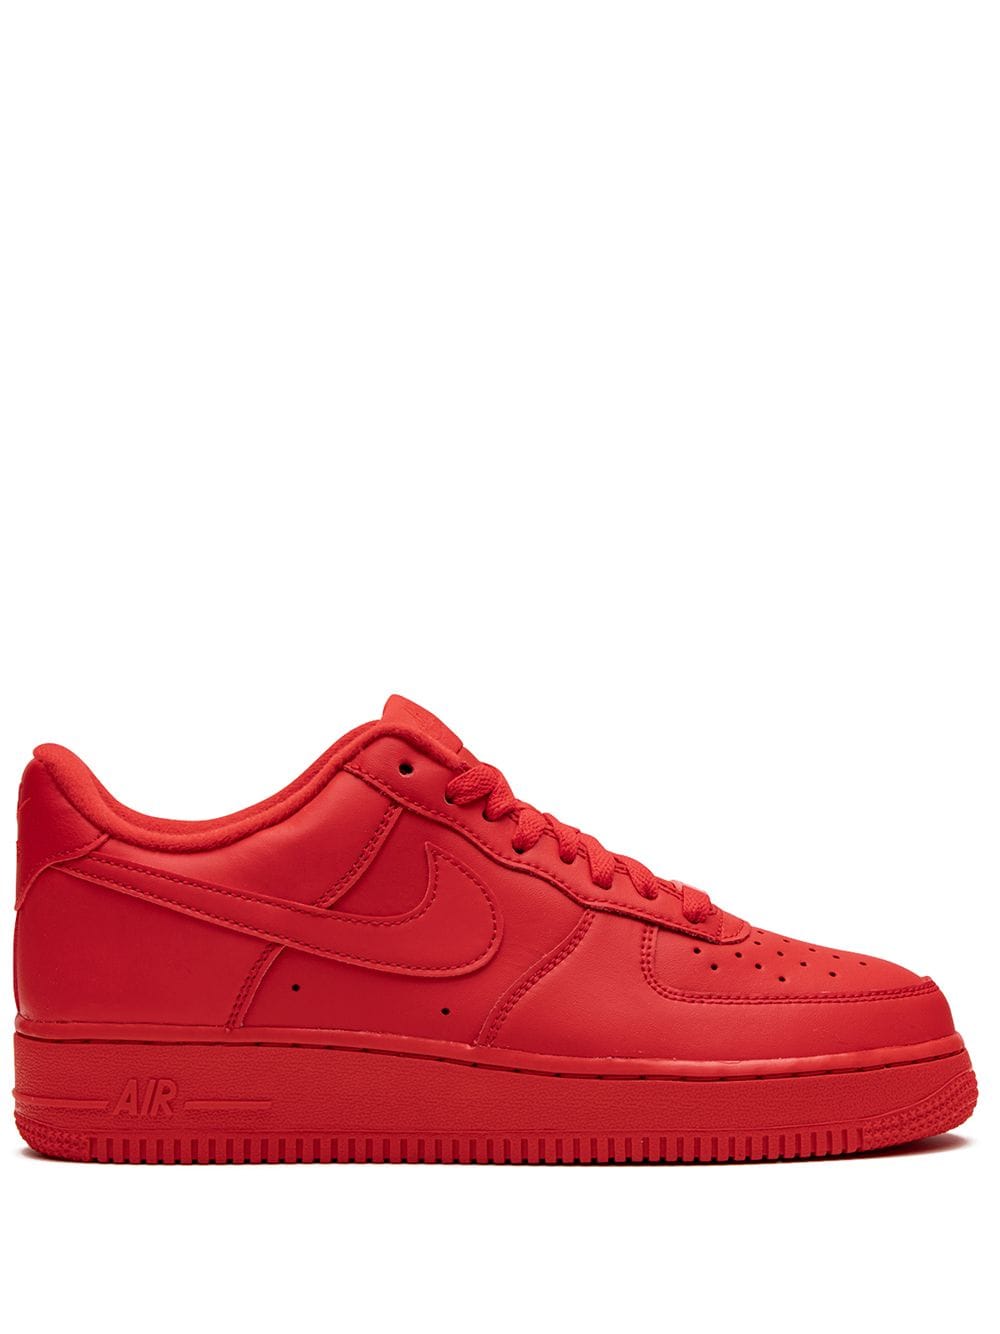 NIKE AIR FORCE ONE ROJOS G5 Landia Sneakers Mexico